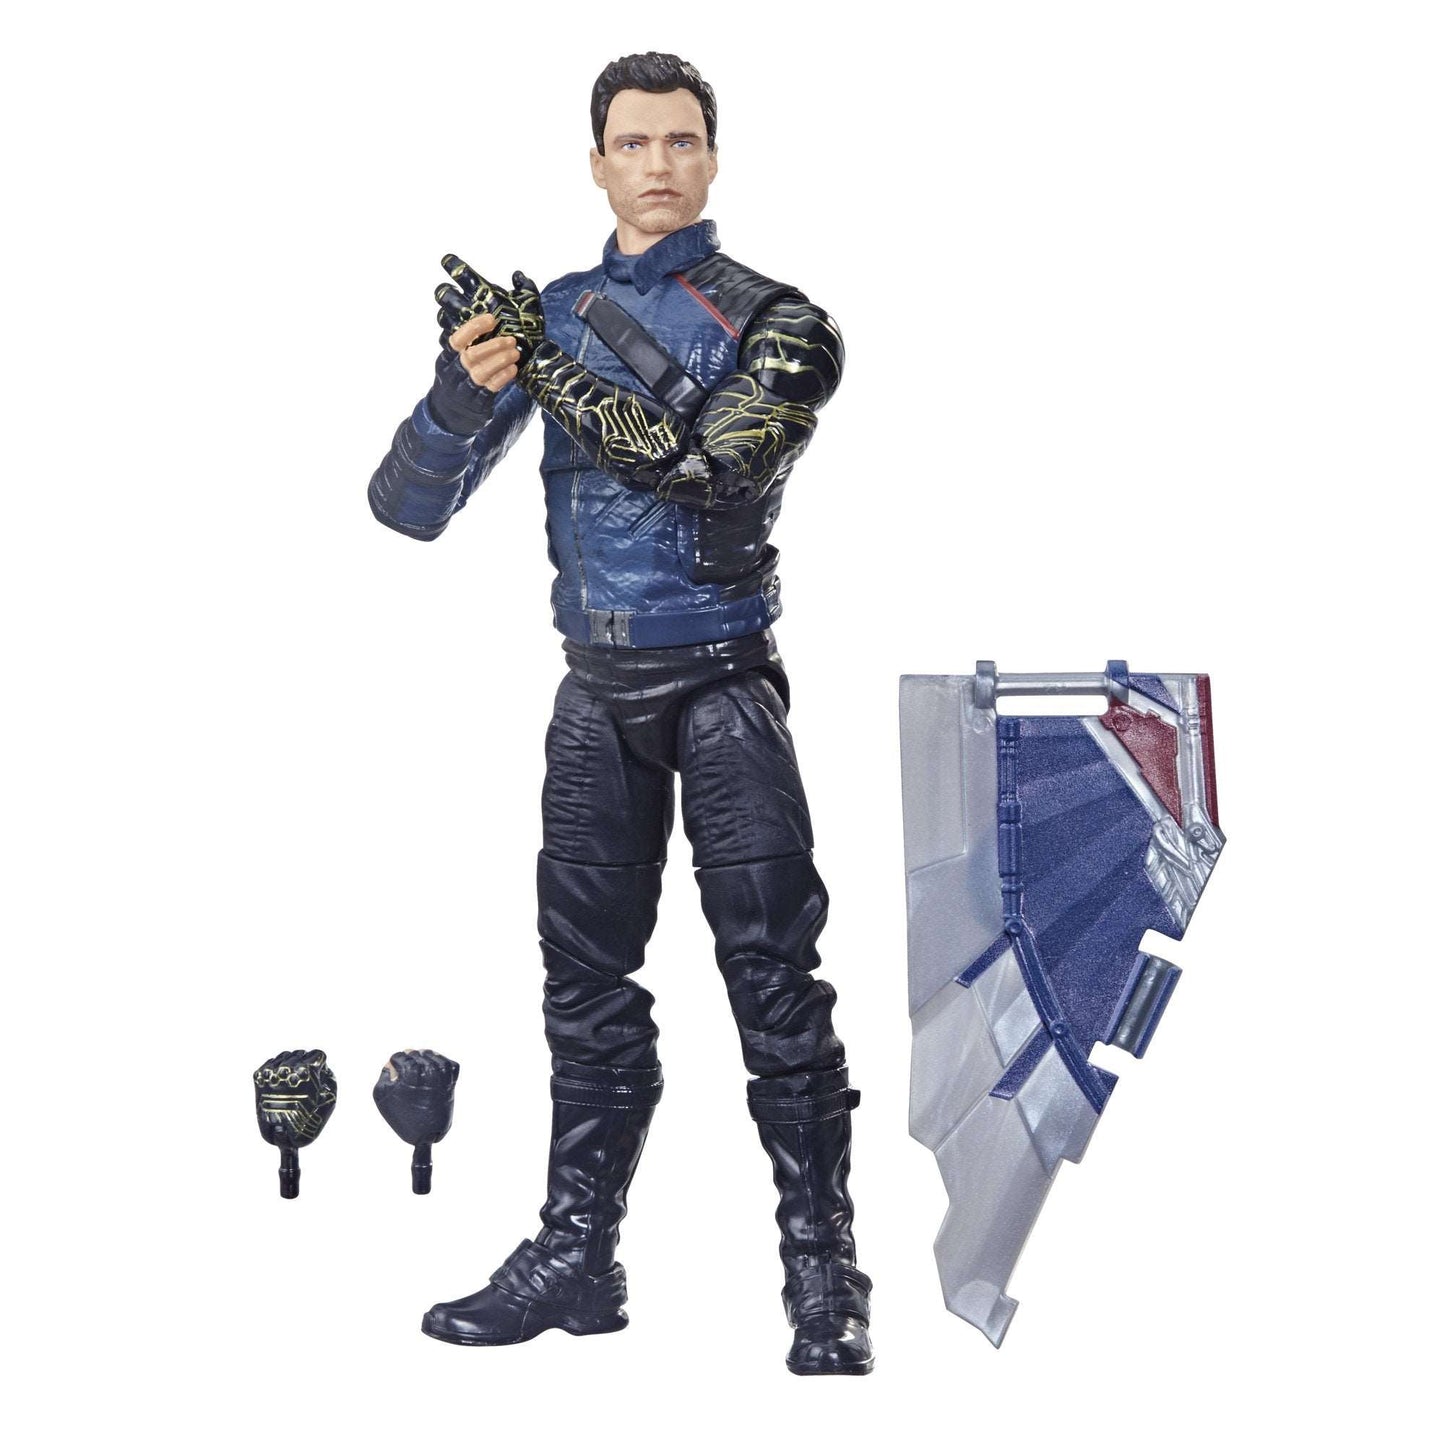 Hasbro Marvel Legends Series Disney+ Avengers Falcon and the Winter Soldier Bucky Barnes figure and accessories